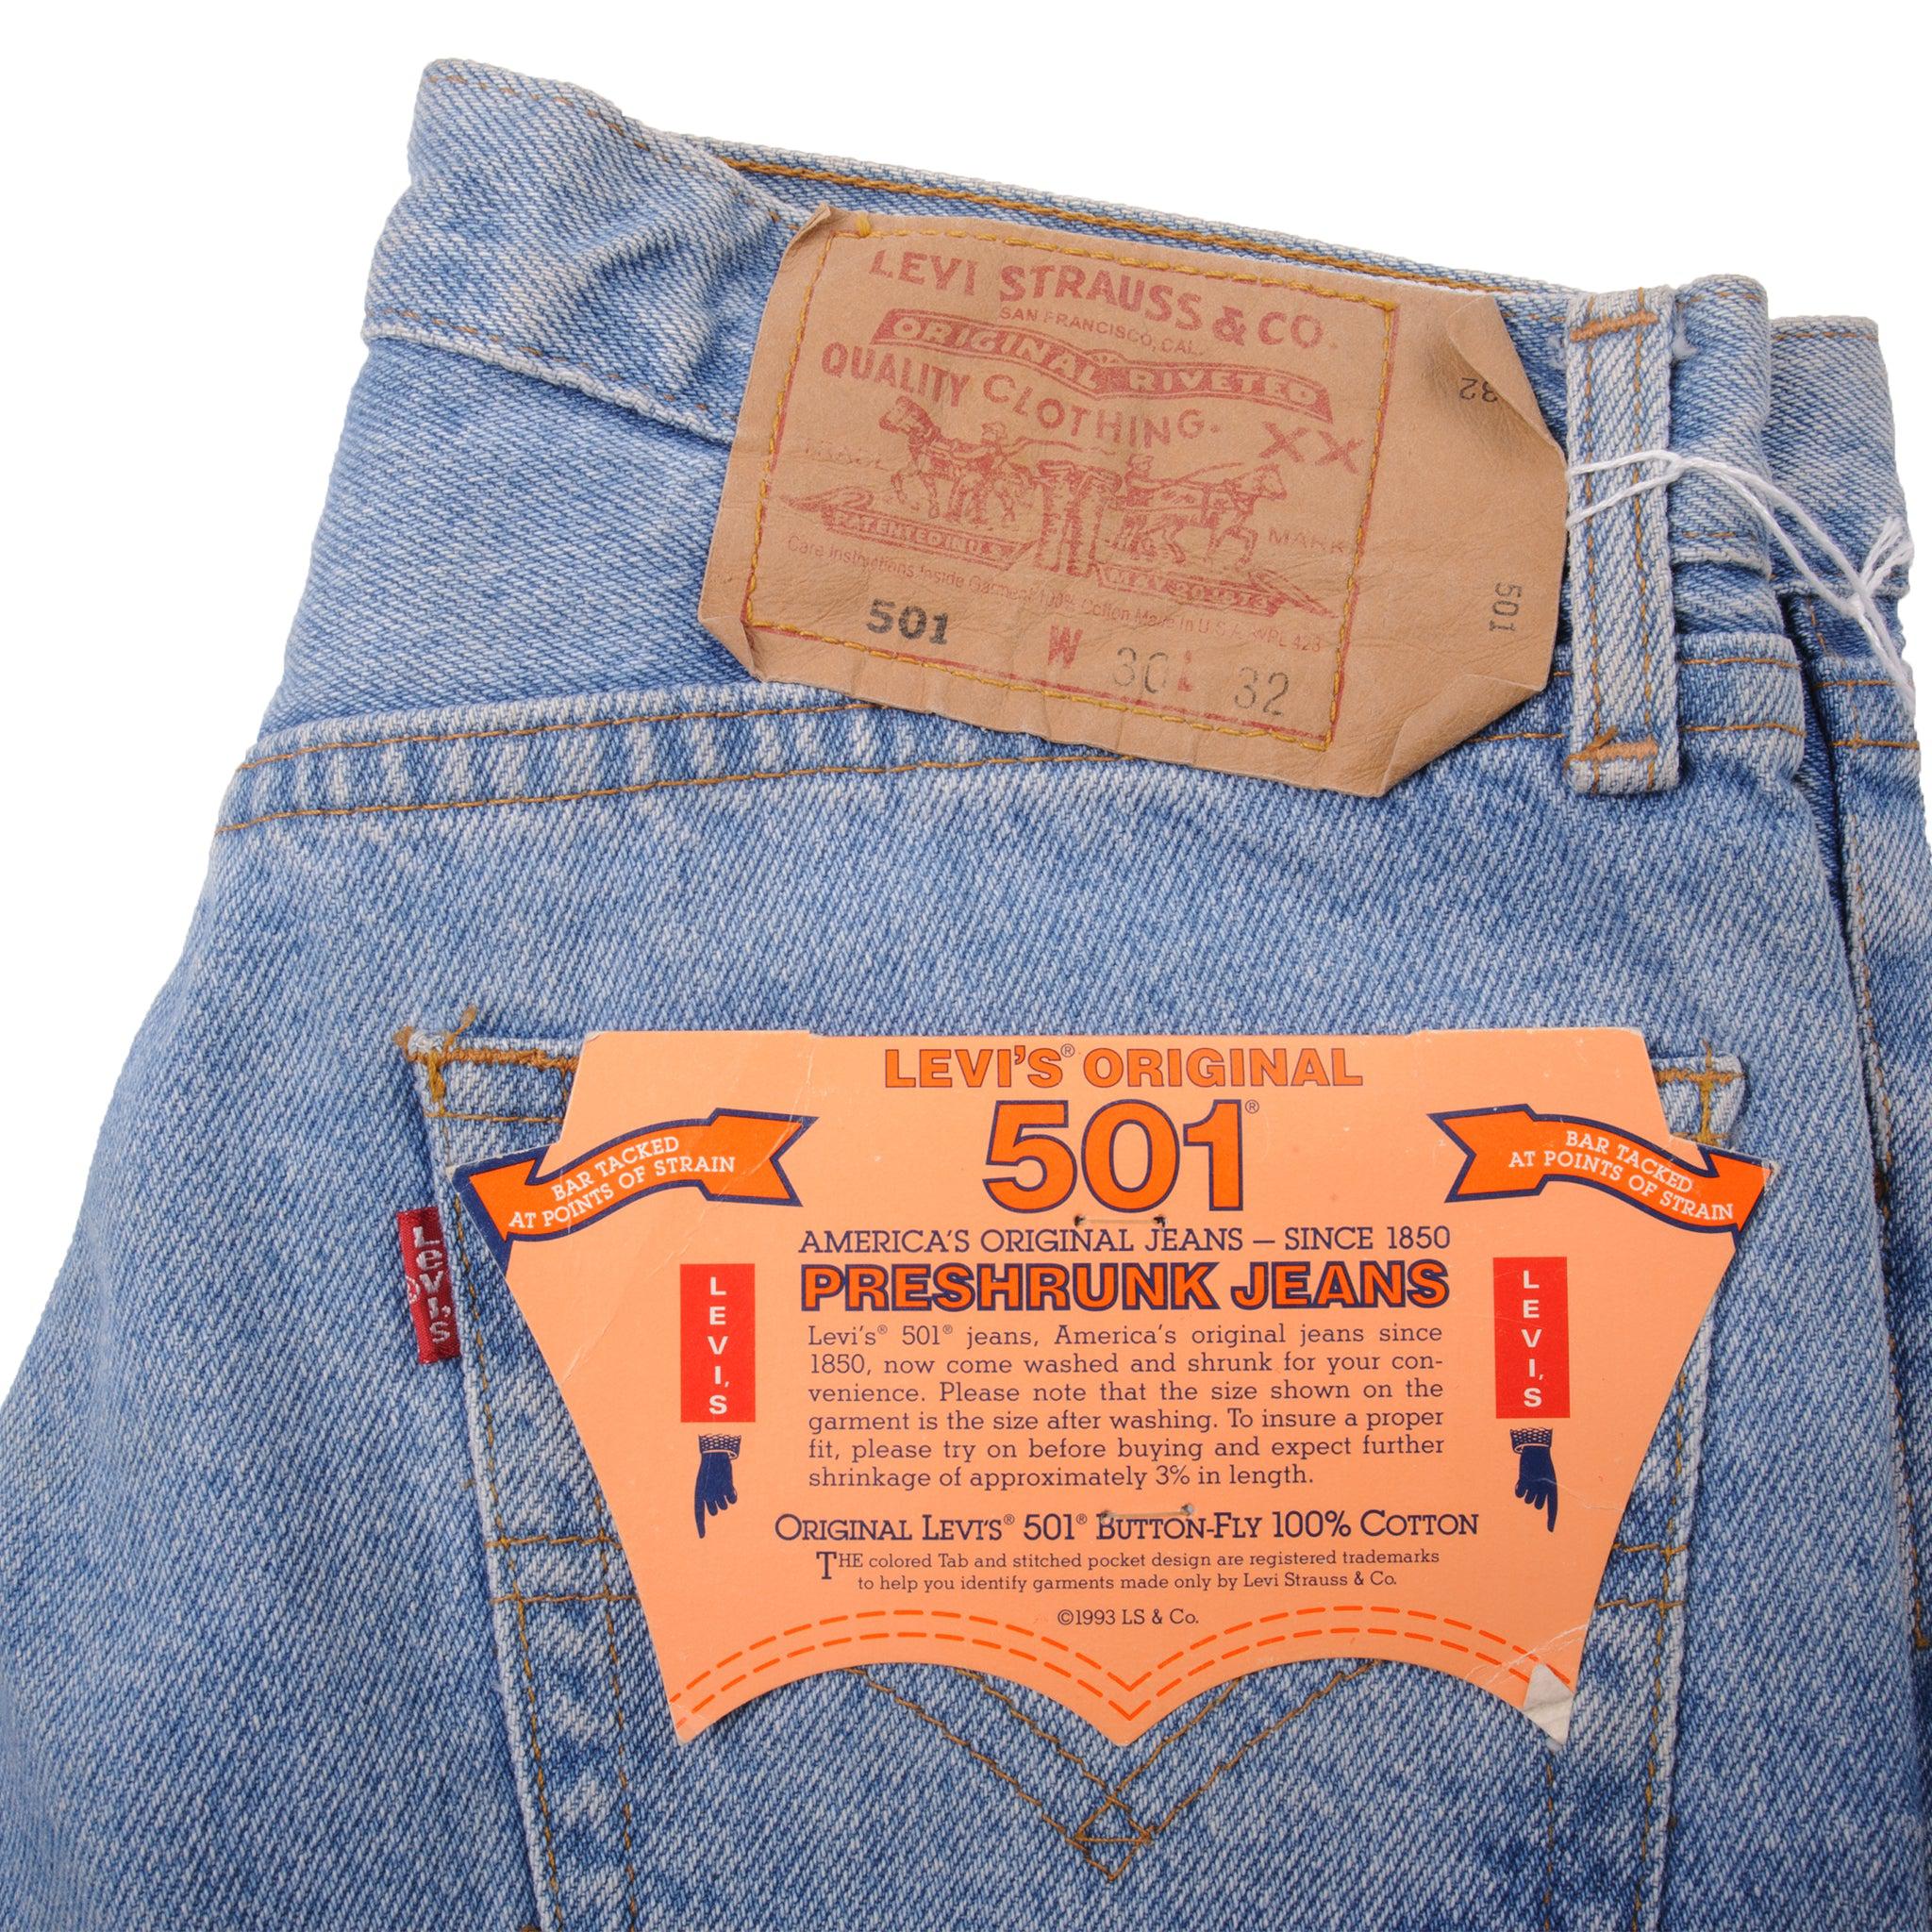 VINTAGE LEVIS 501 PRESHRUNK JEANS 1993 SIZE 30X32 W30 L32 MADE IN USA –  Vintage rare usa